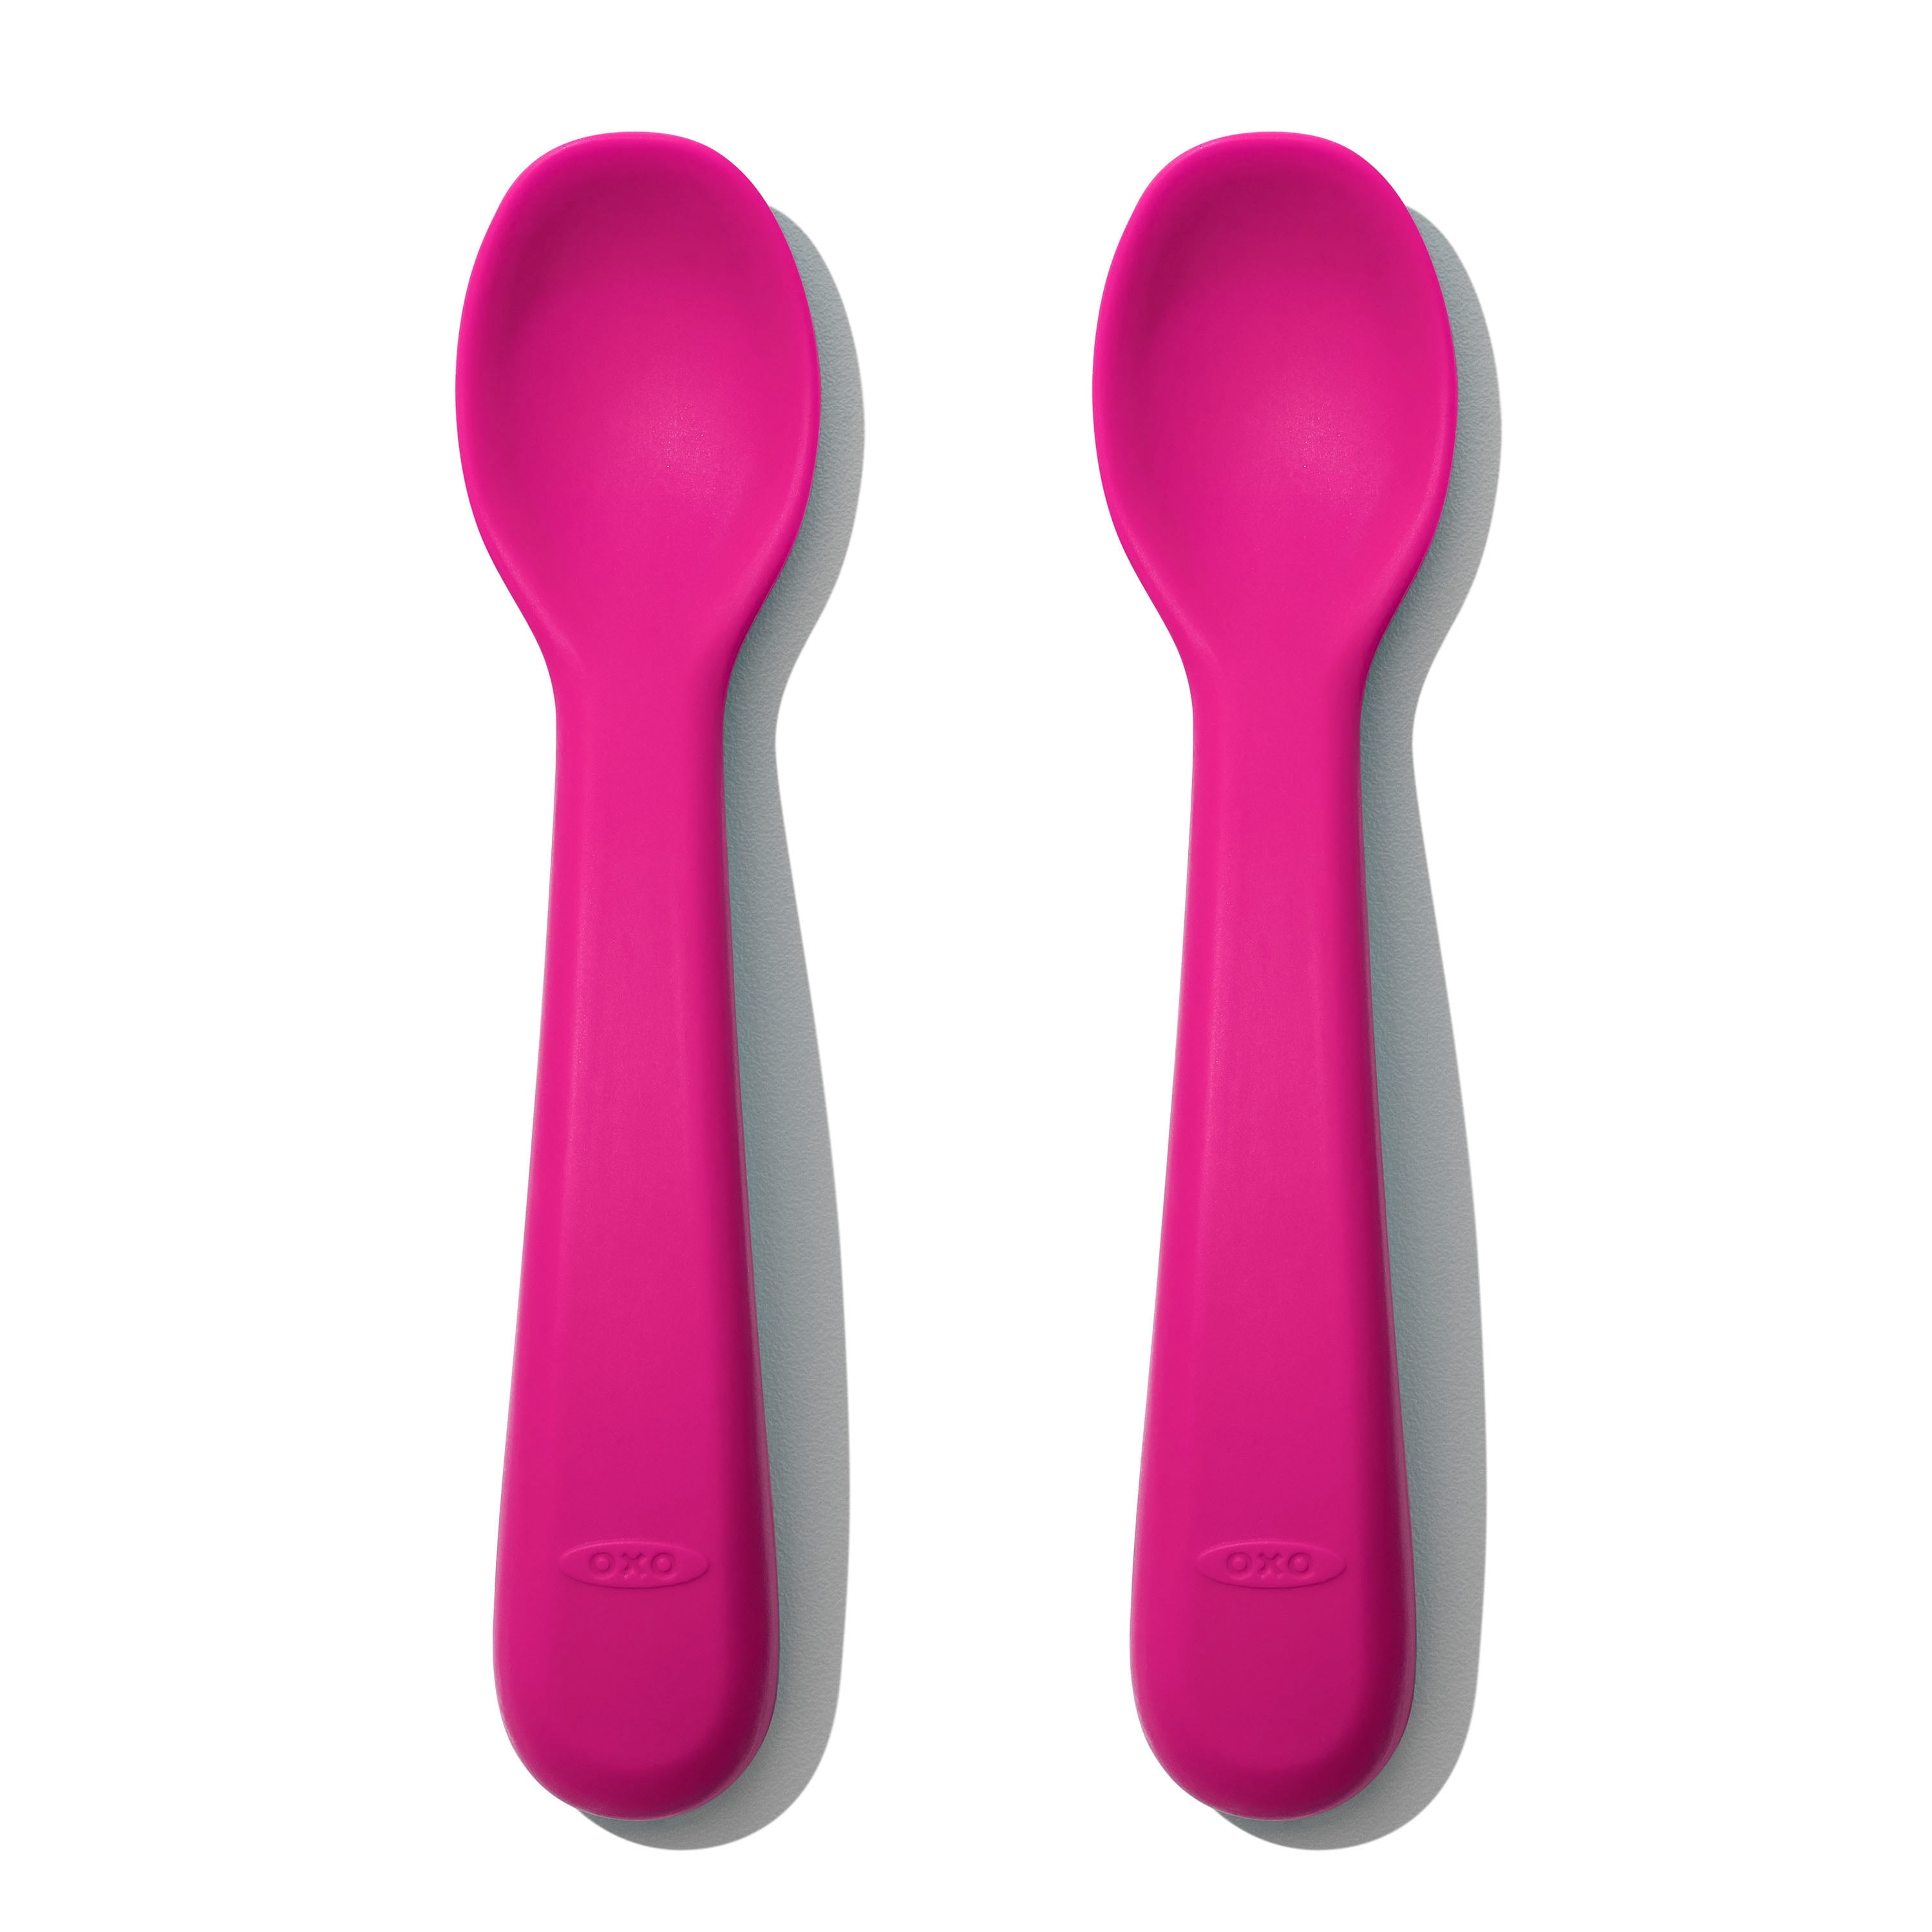 Gentle Silicone Spoons, 2pk